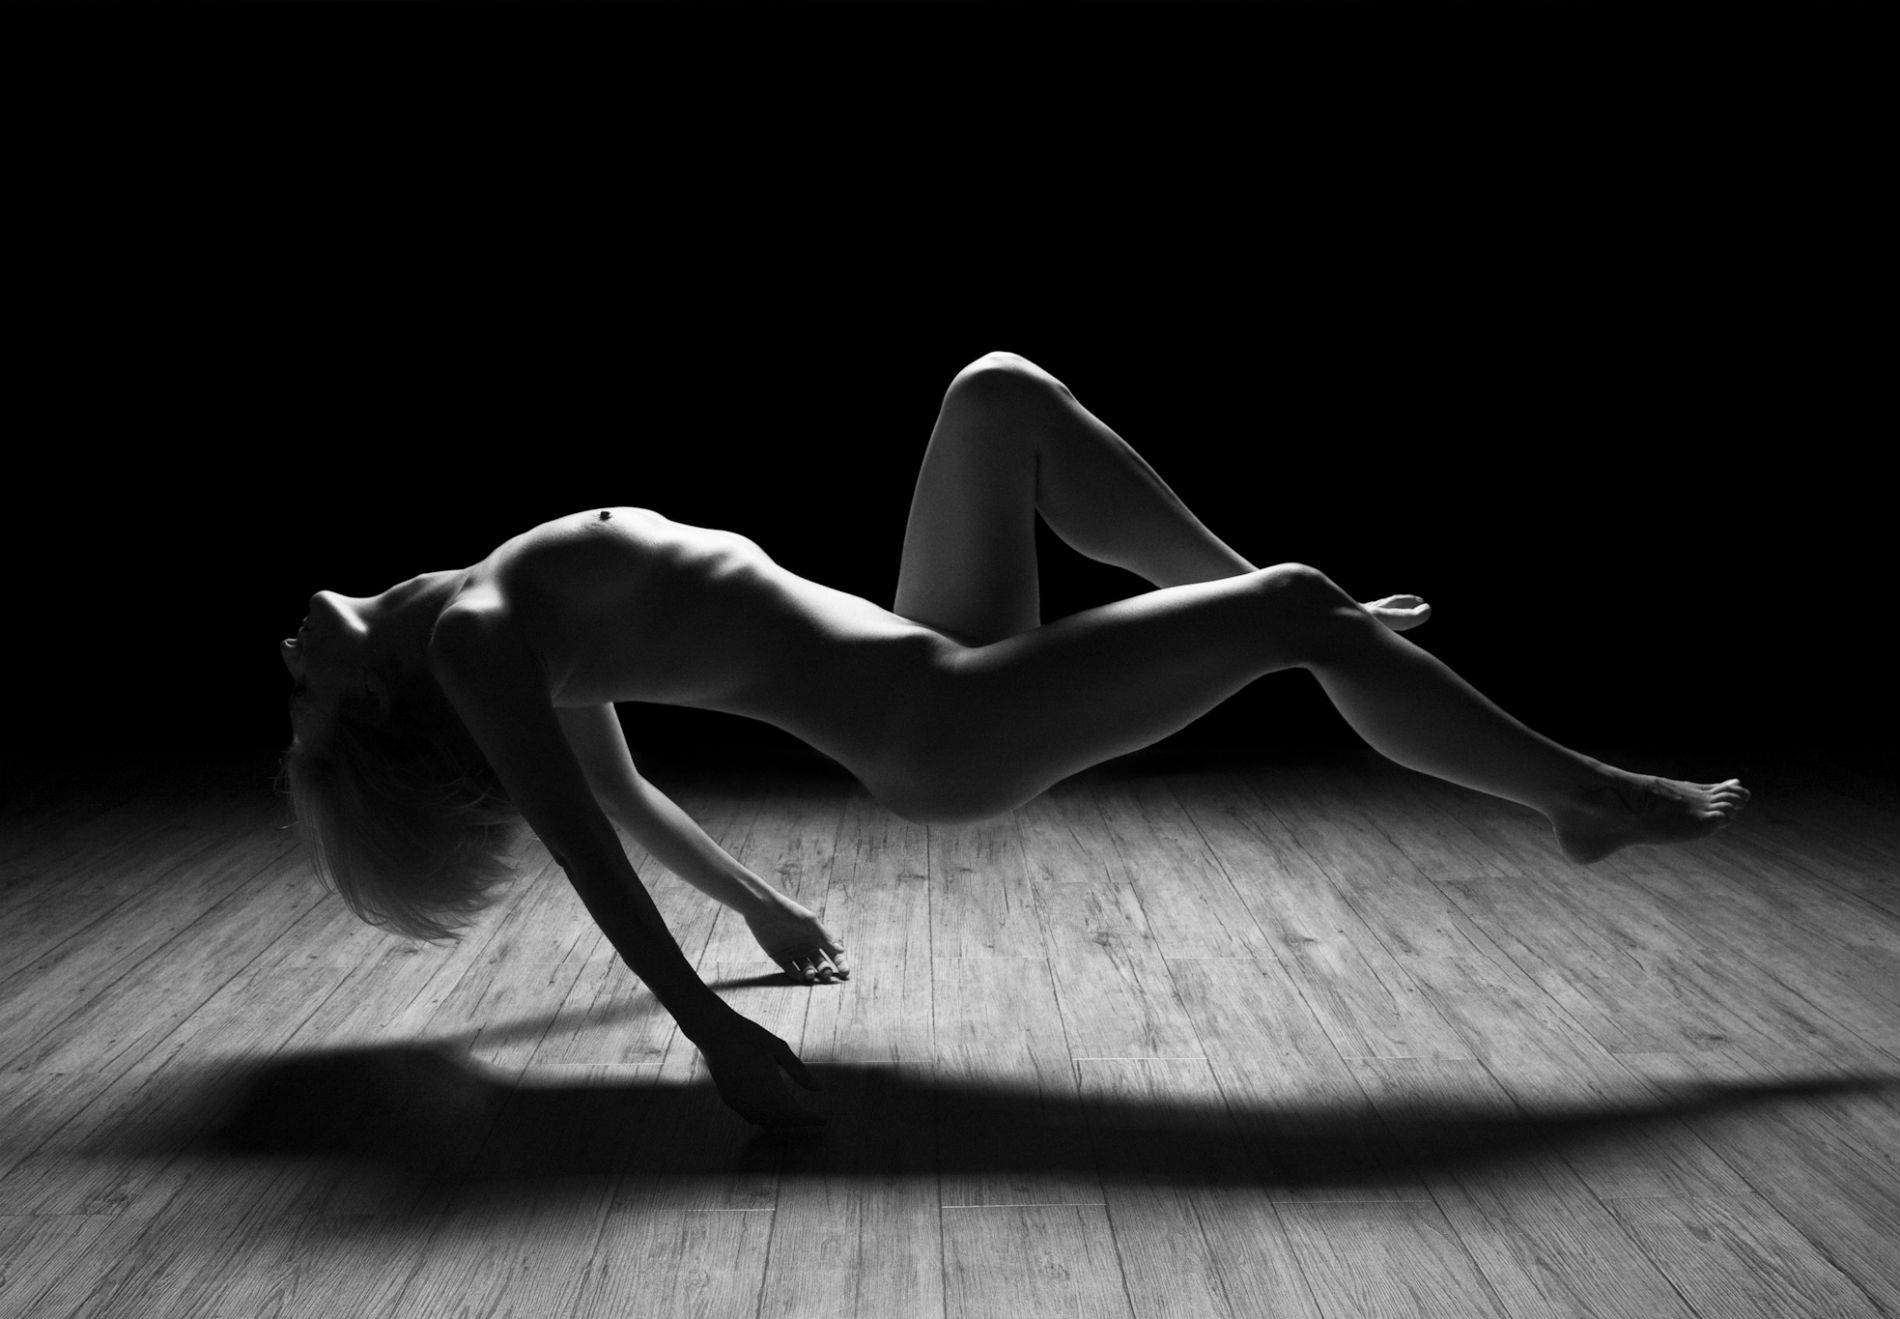 dave cusson recommends Black & White Nude Photography